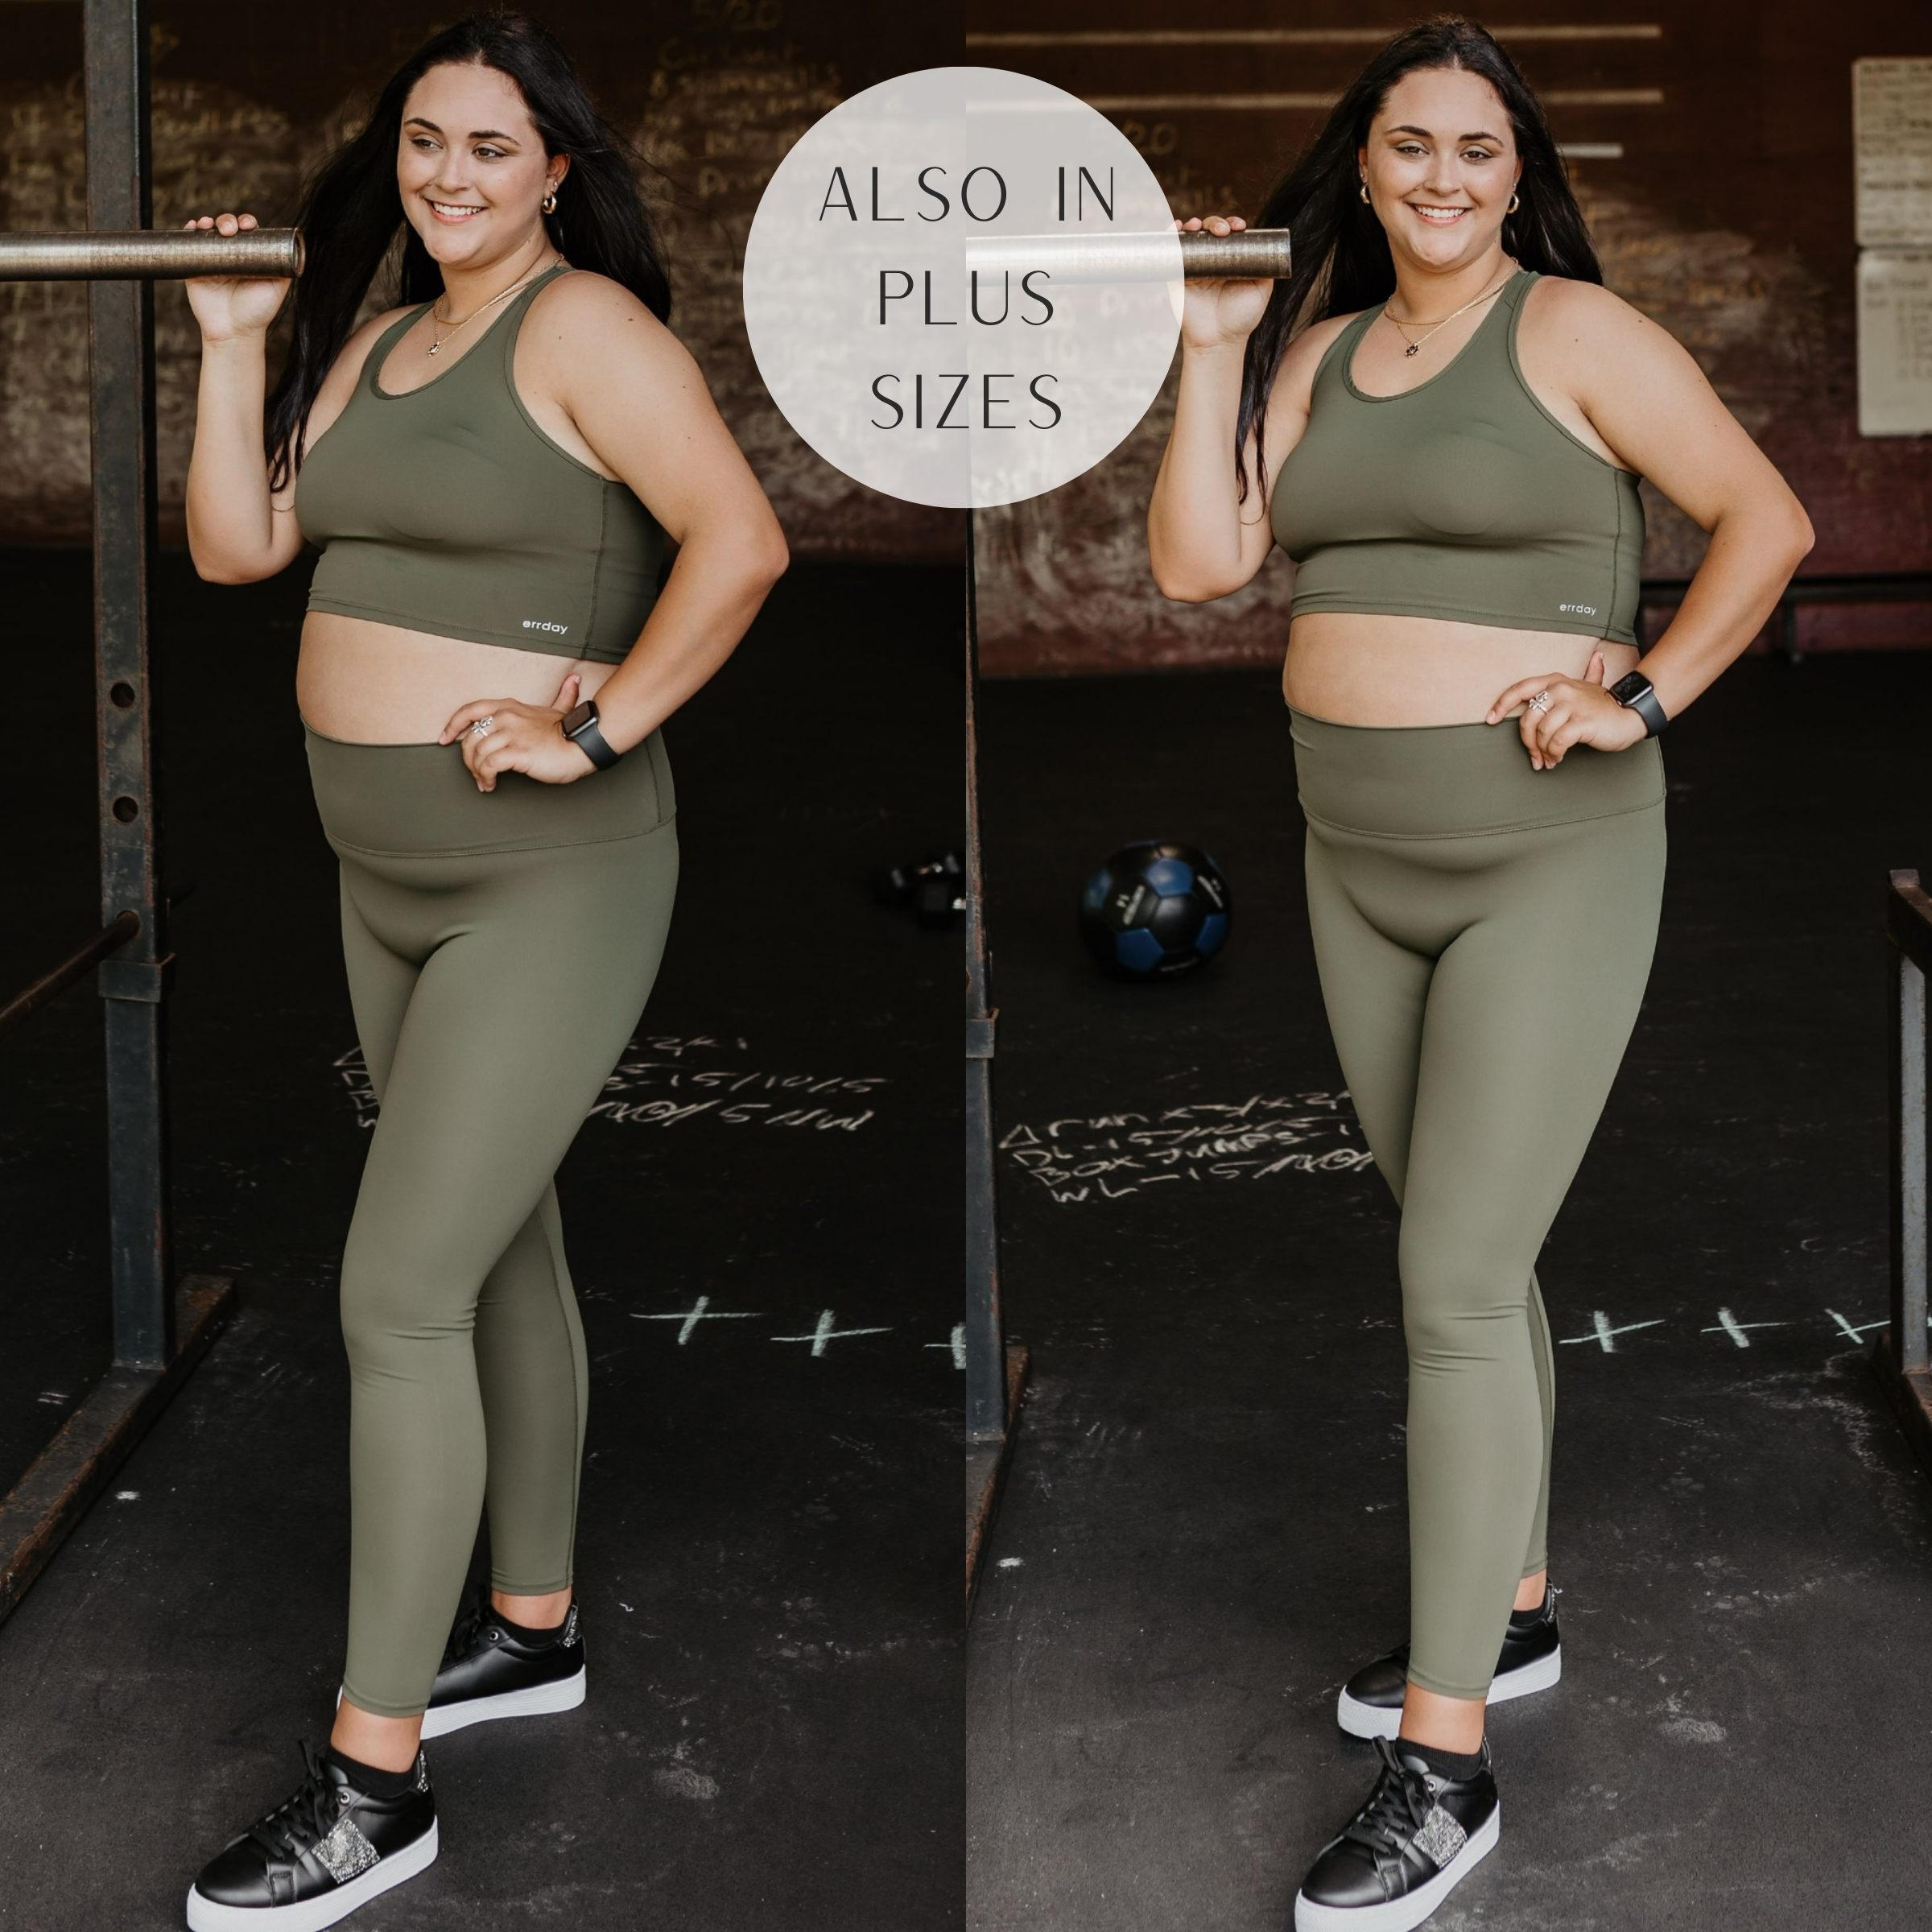 Model is wearing a pair of olive green leggings with a high waist. Model has them paired with gold jewelry, black sneakers, and a matching olive sports bra.